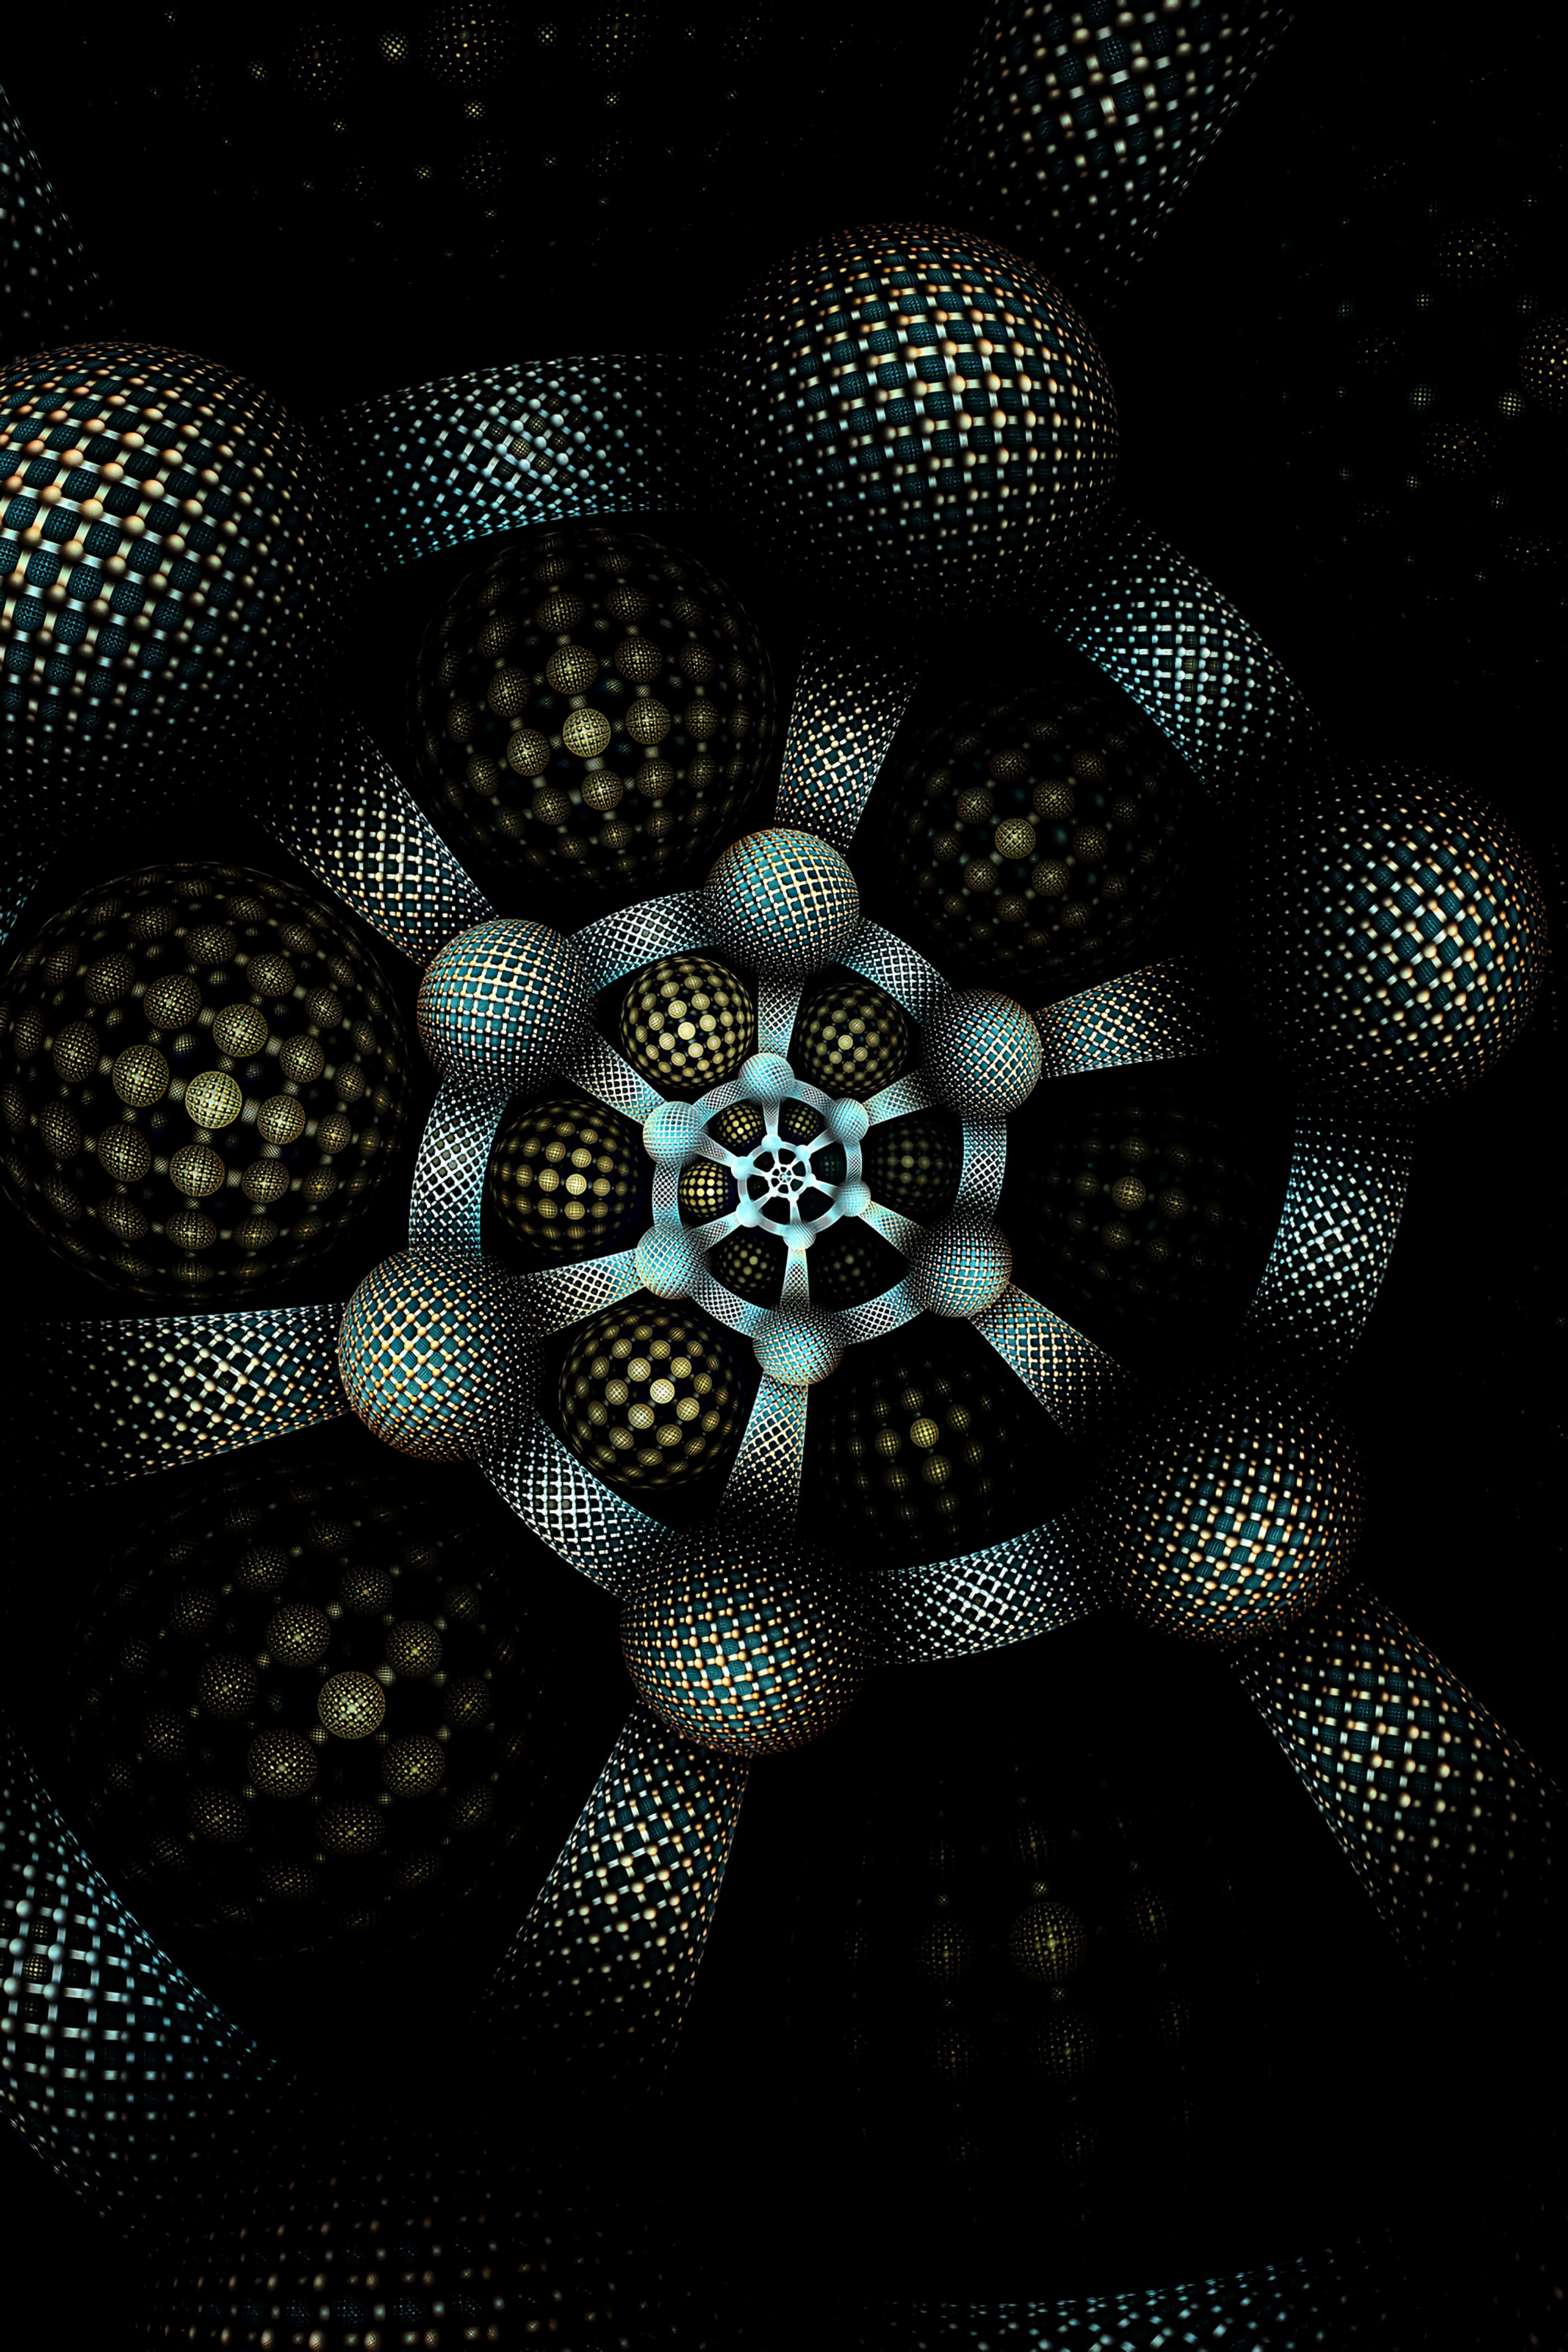 dark, form, circles, involute, abstract, pattern, fractal, swirling cell phone wallpapers